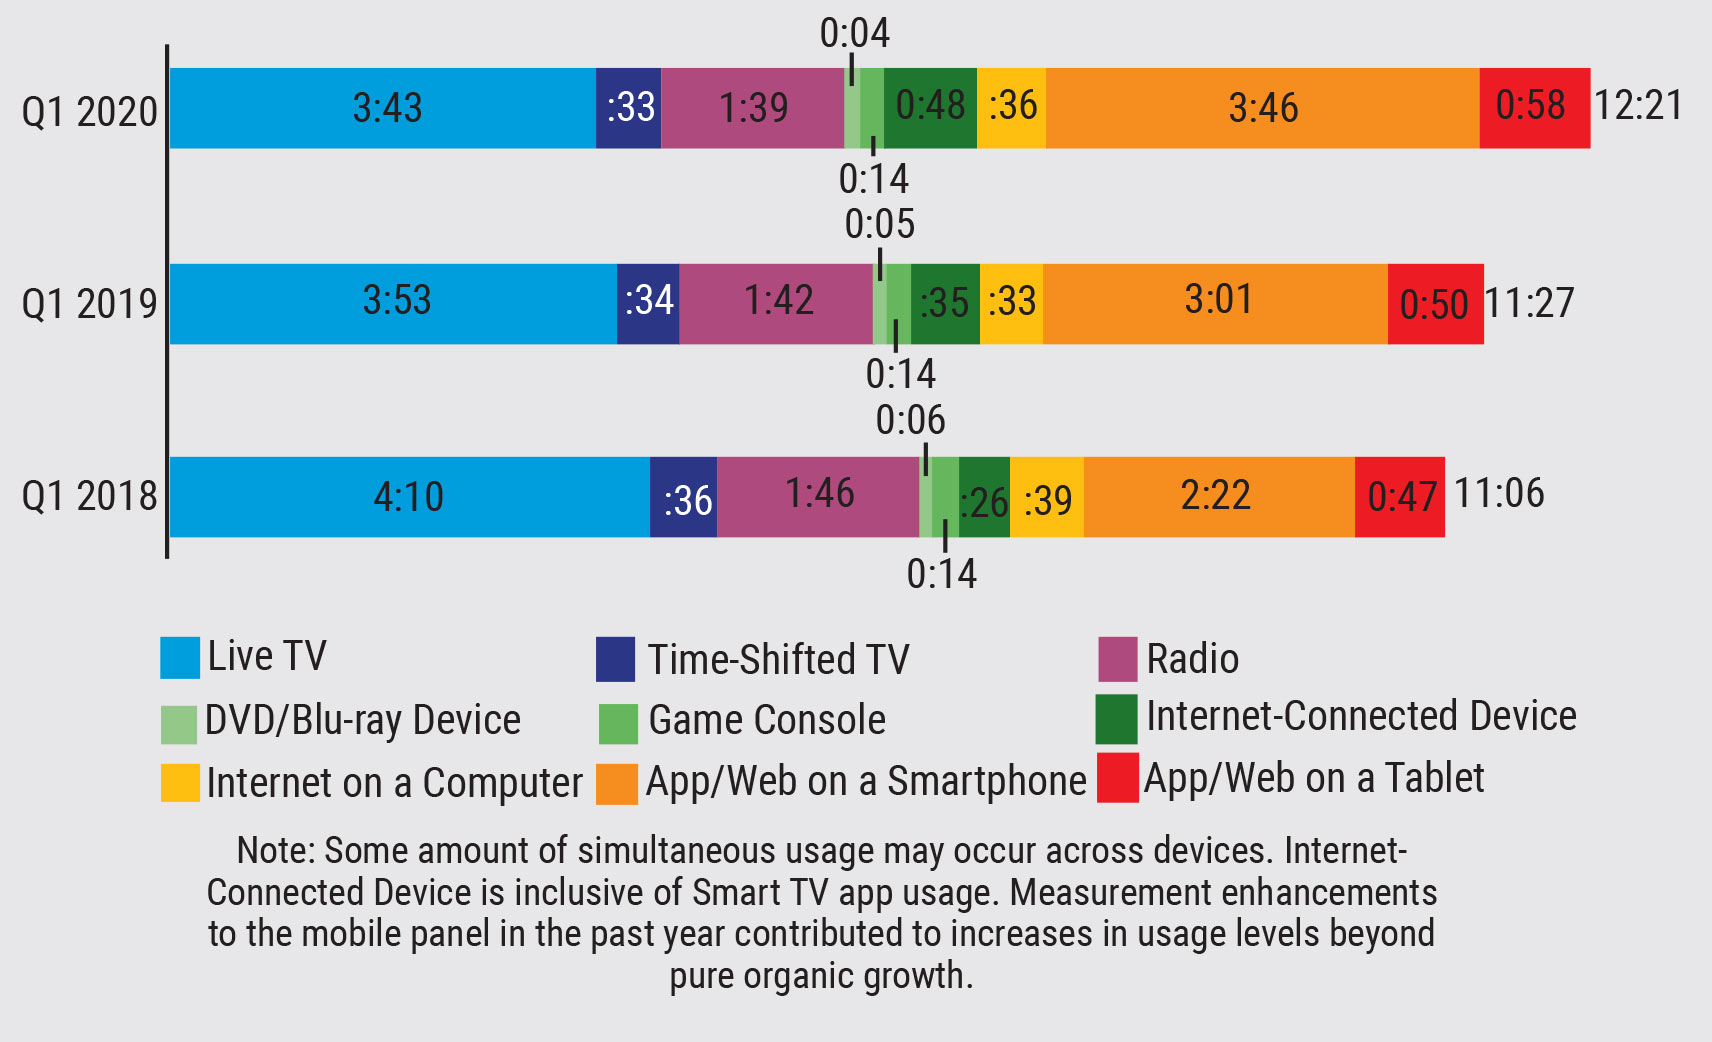 Average daily time spent on screens for adults 18 years and older.